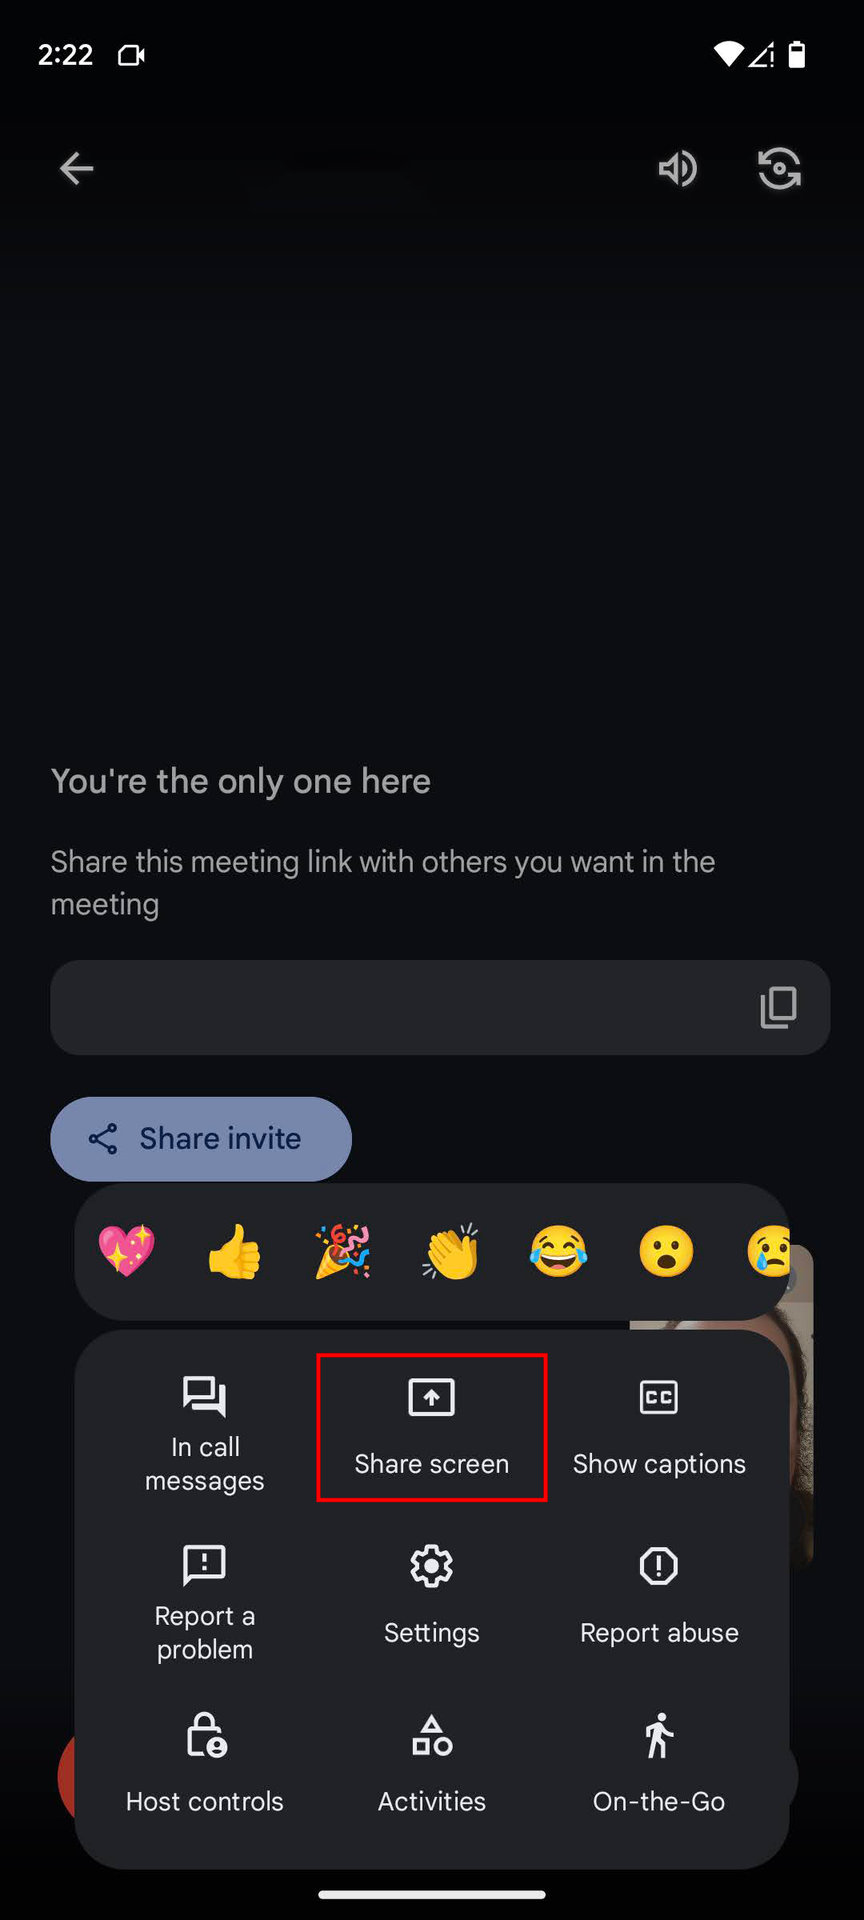 How to share your screen on Google Meet (2)